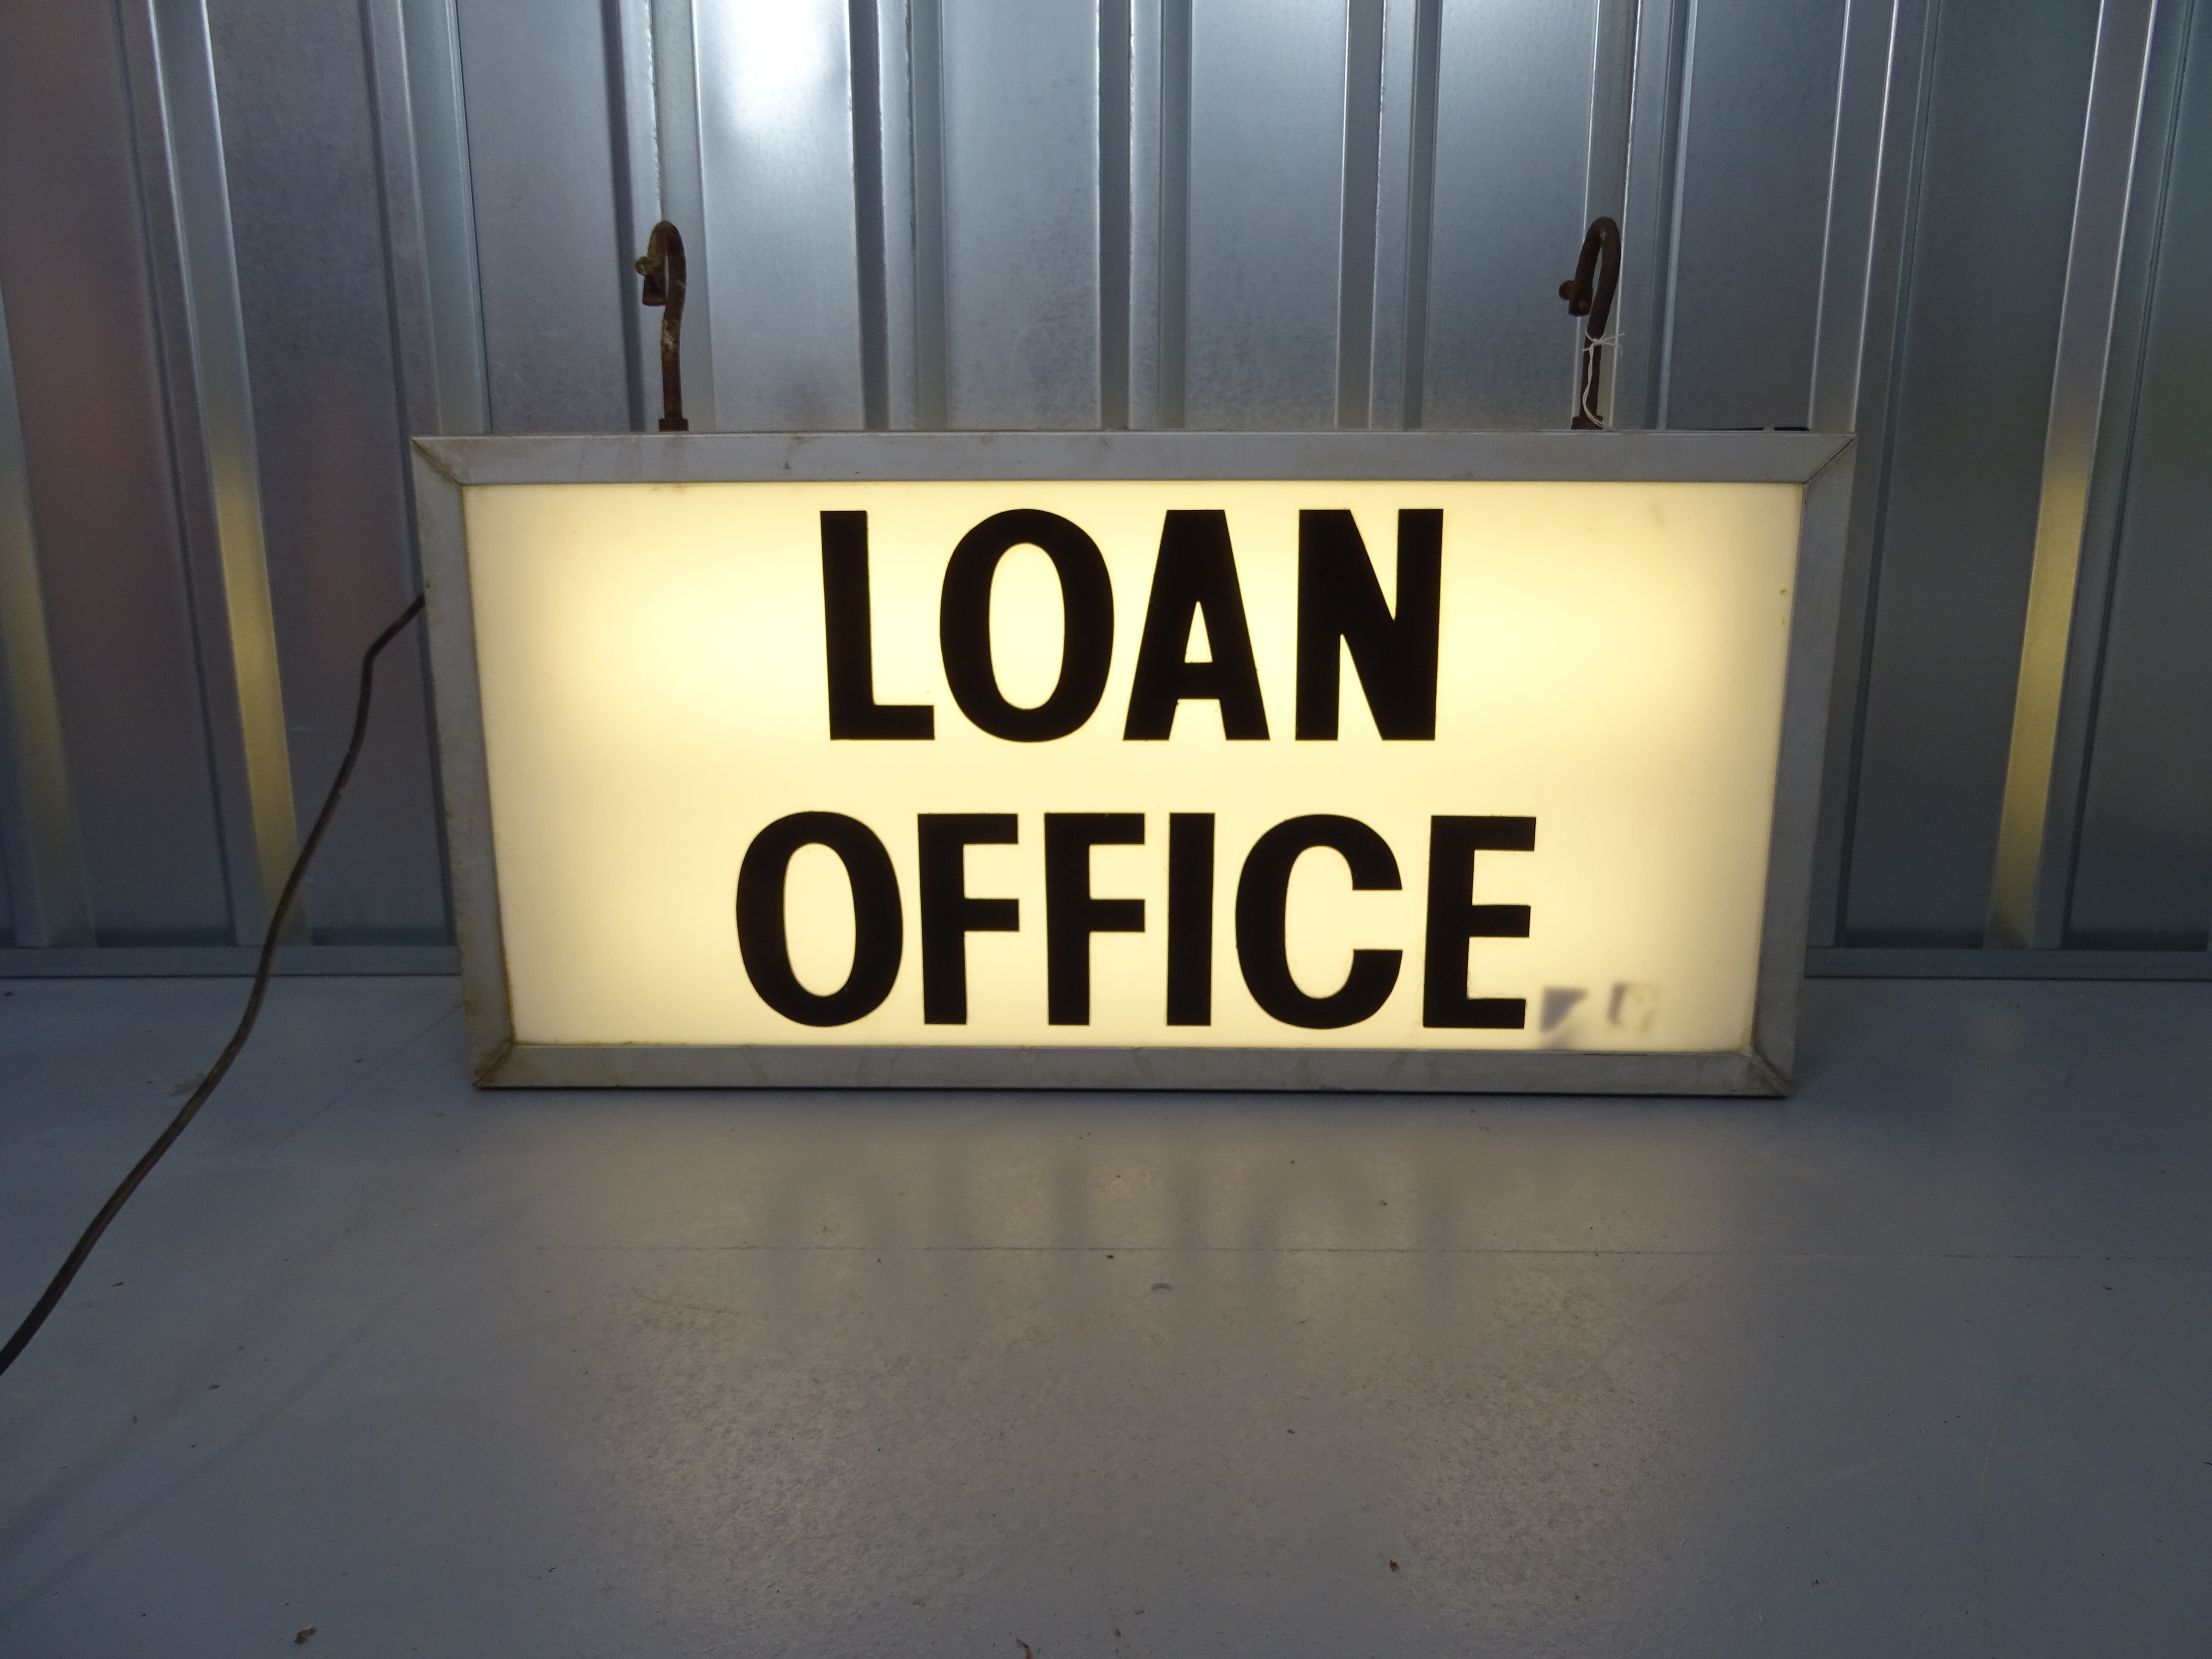 LOAN OFFICE - (37" x 18" x 7") pawn shop electric light up (working not PAT tested) double sided